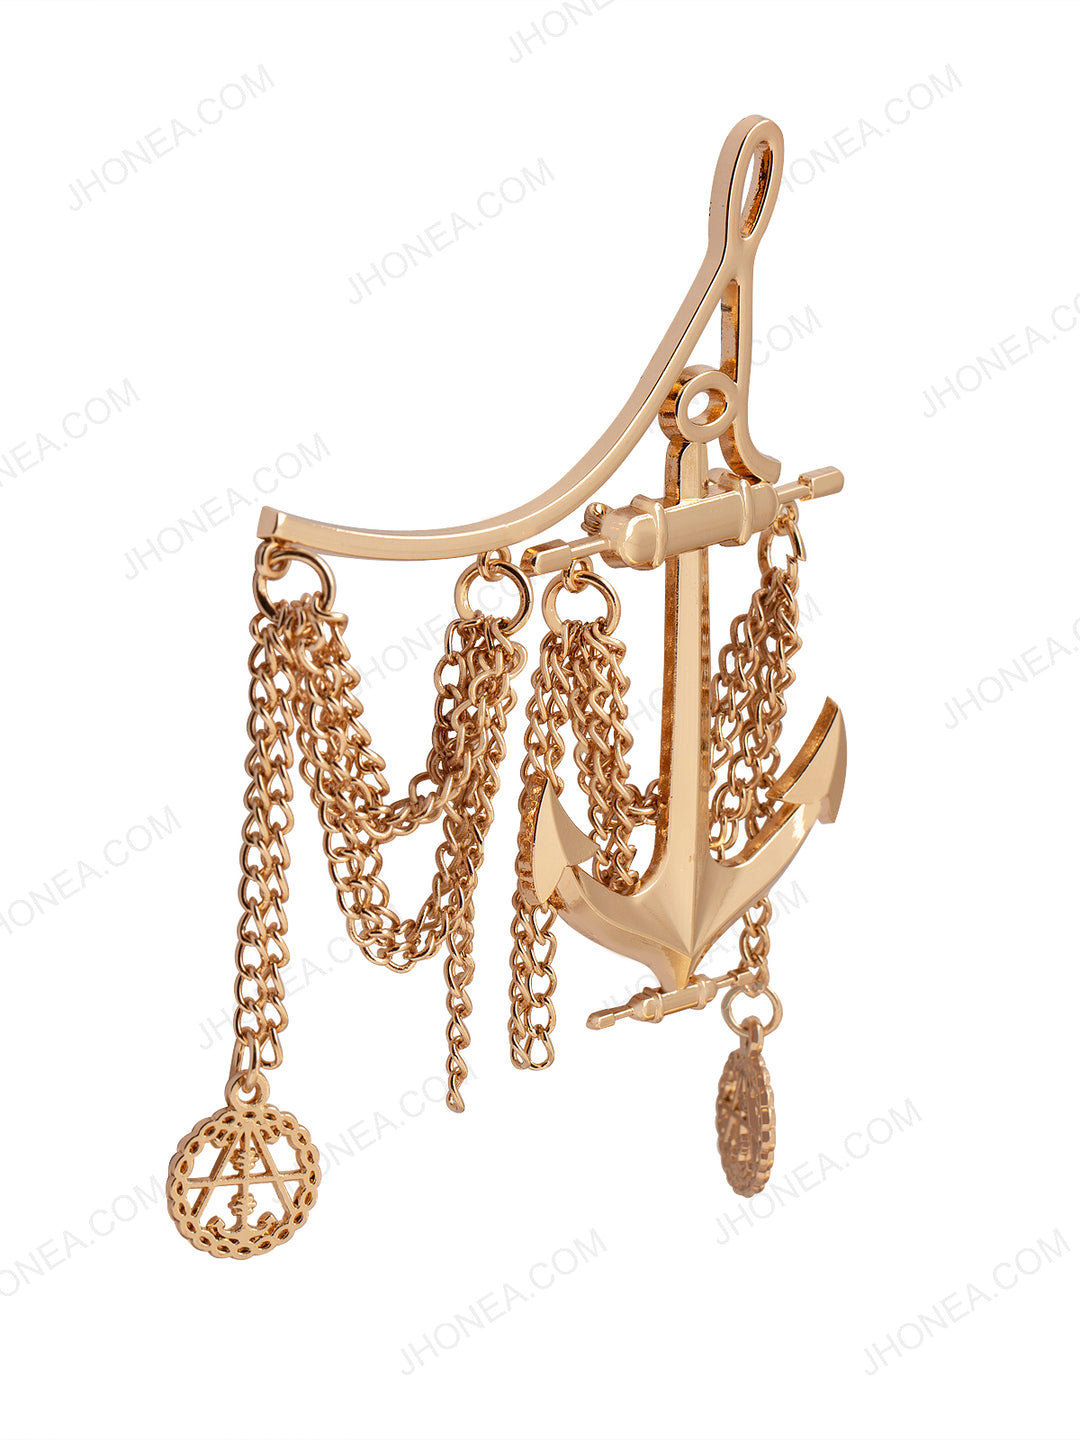 Outstanding Shiny Gold Anchor with Chain Men's Brooch